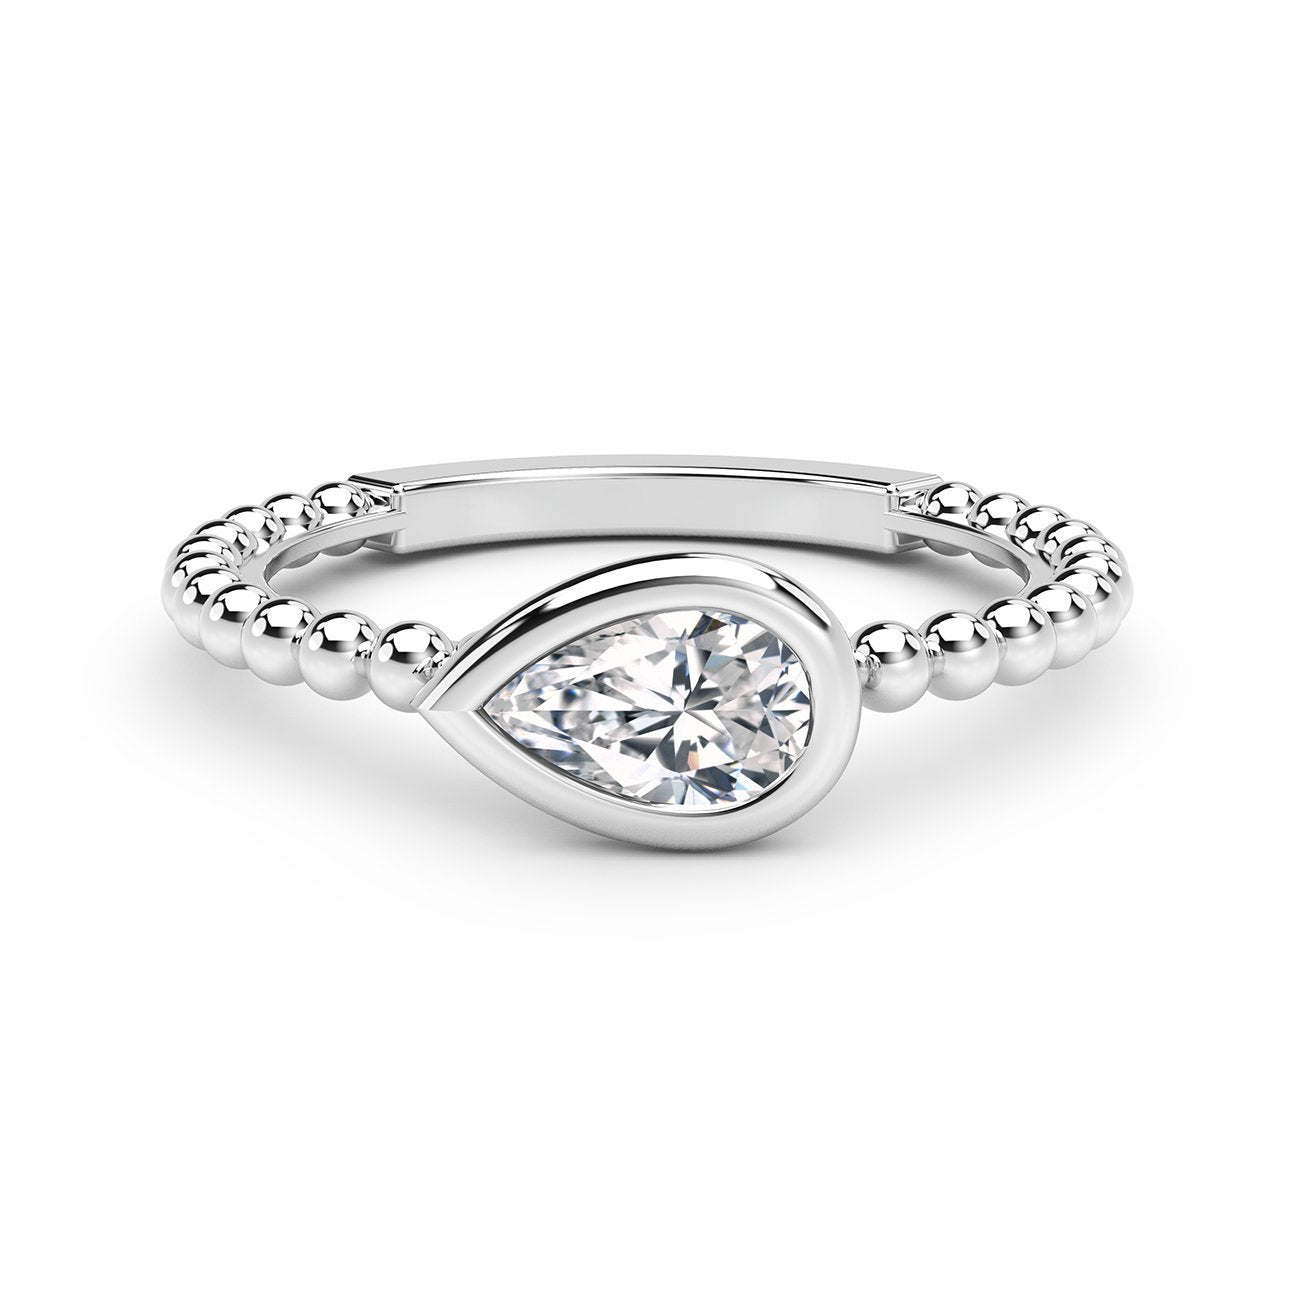 18K White Gold Pear Shape Diamond Stackable Ring With Beaded Shank By Forevermark